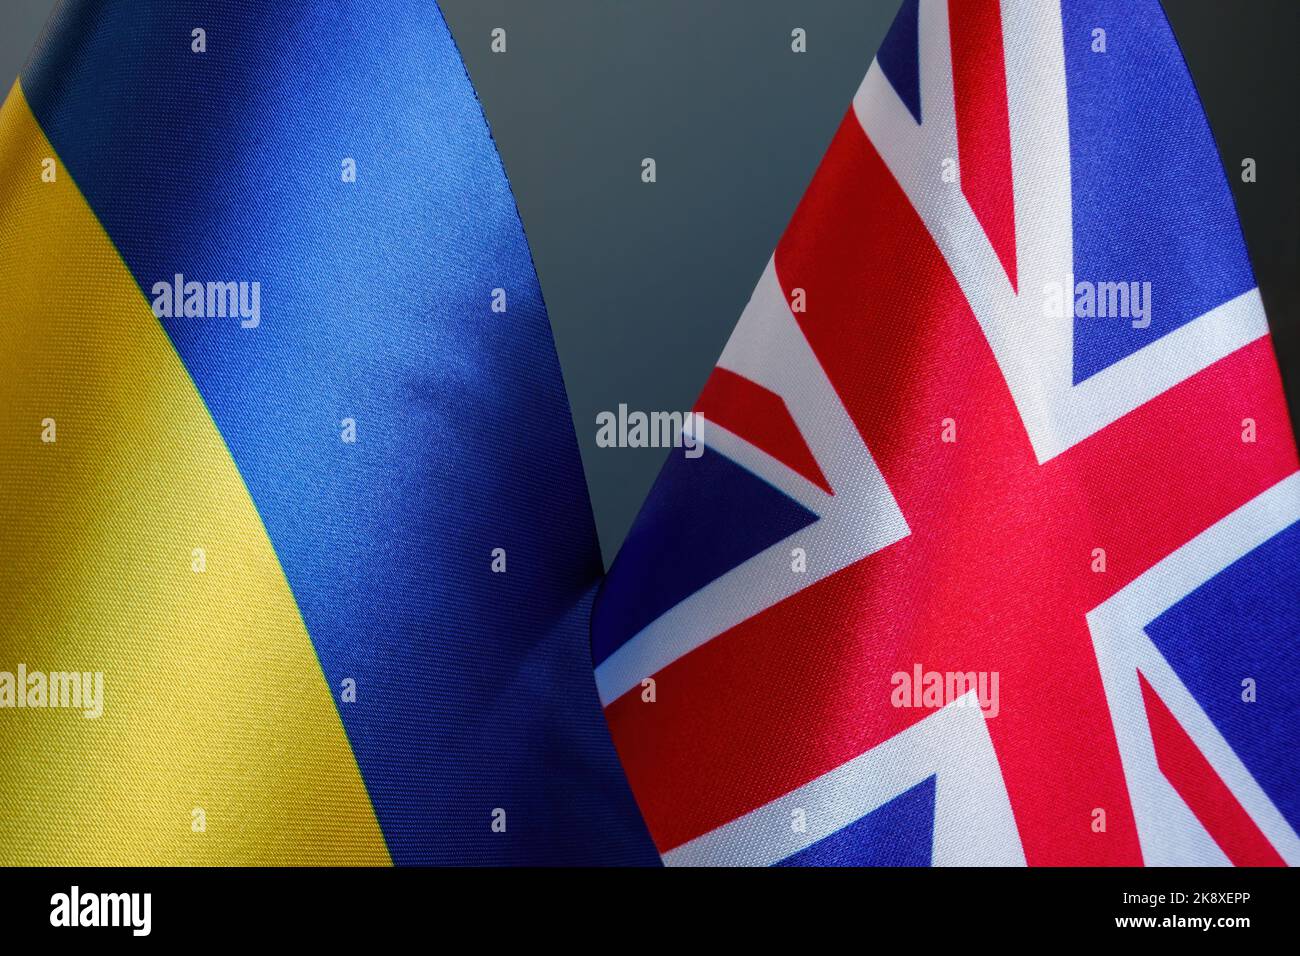 Nearby are the flags of Ukraine and Great Britain as symbols of diplomacy and support. Stock Photo